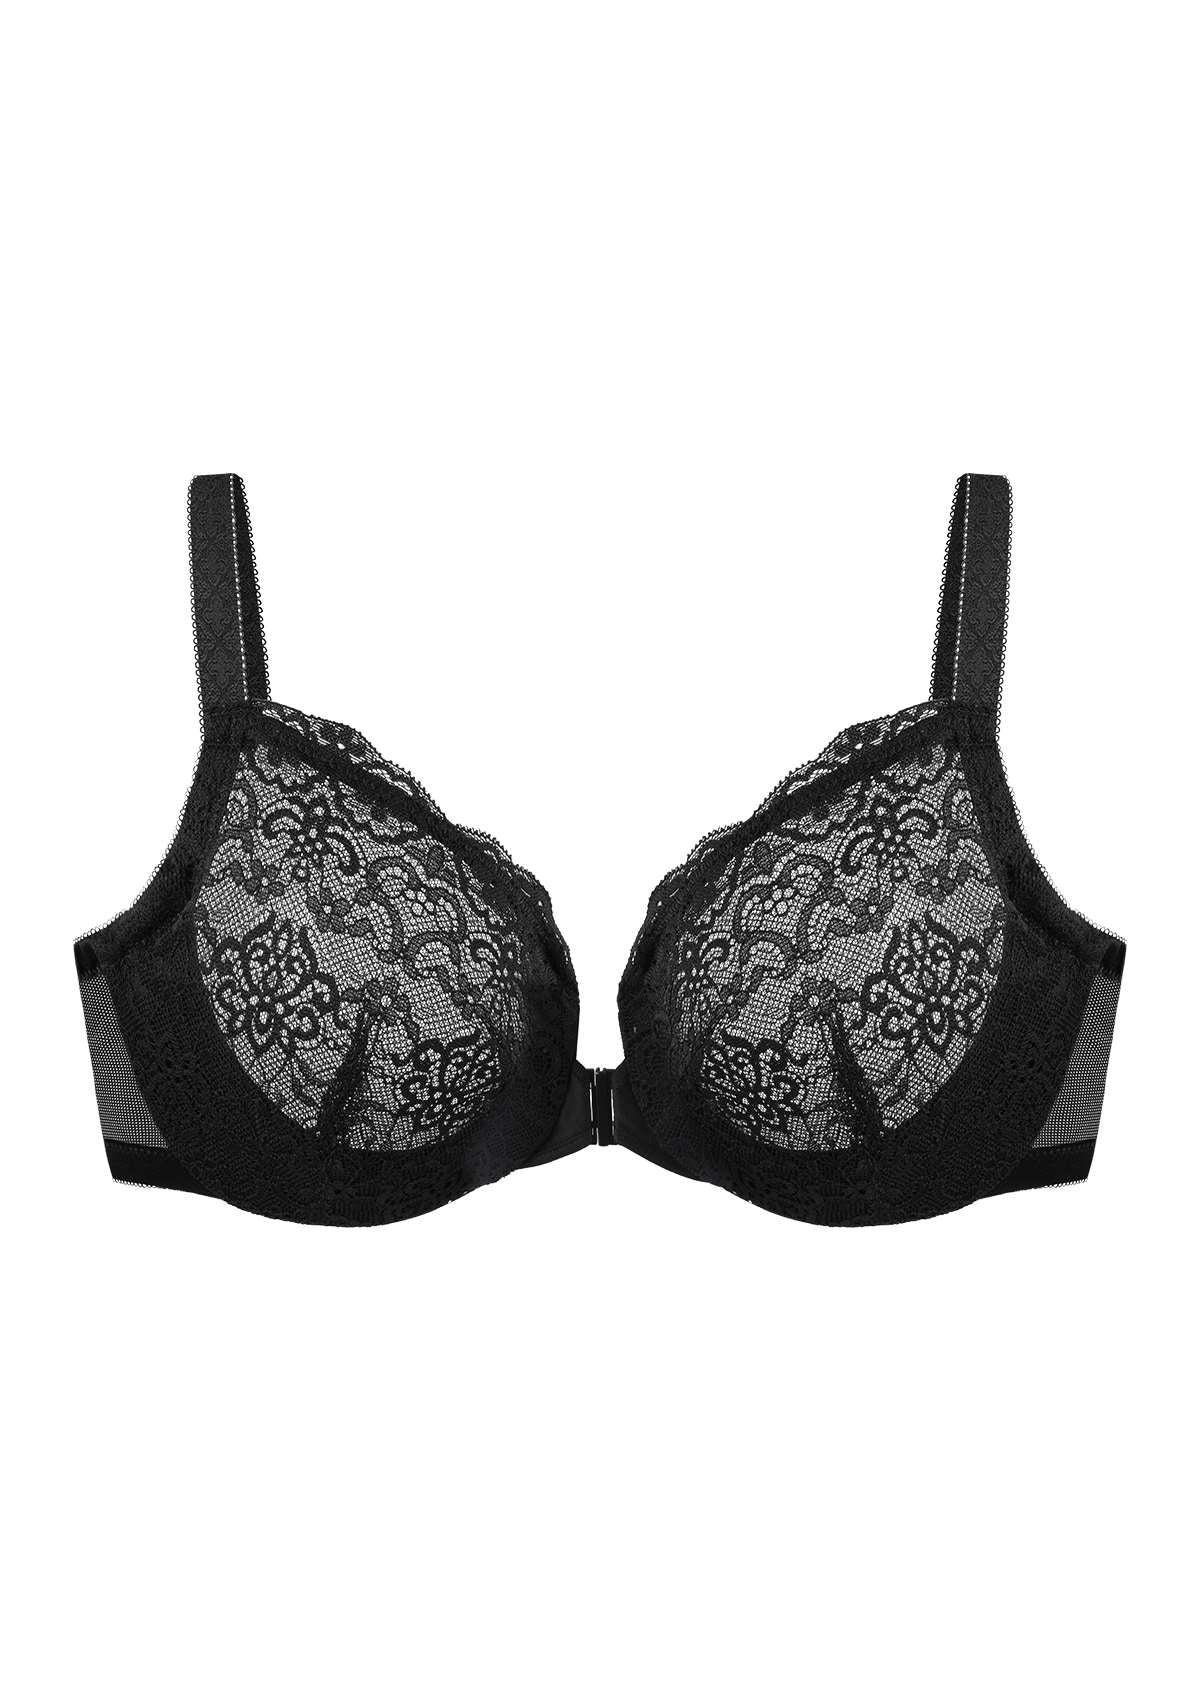 HSIA Nymphaea Front-Close Unlined Retro Floral Lace Back Smoothing Bra - Black / 40 / G